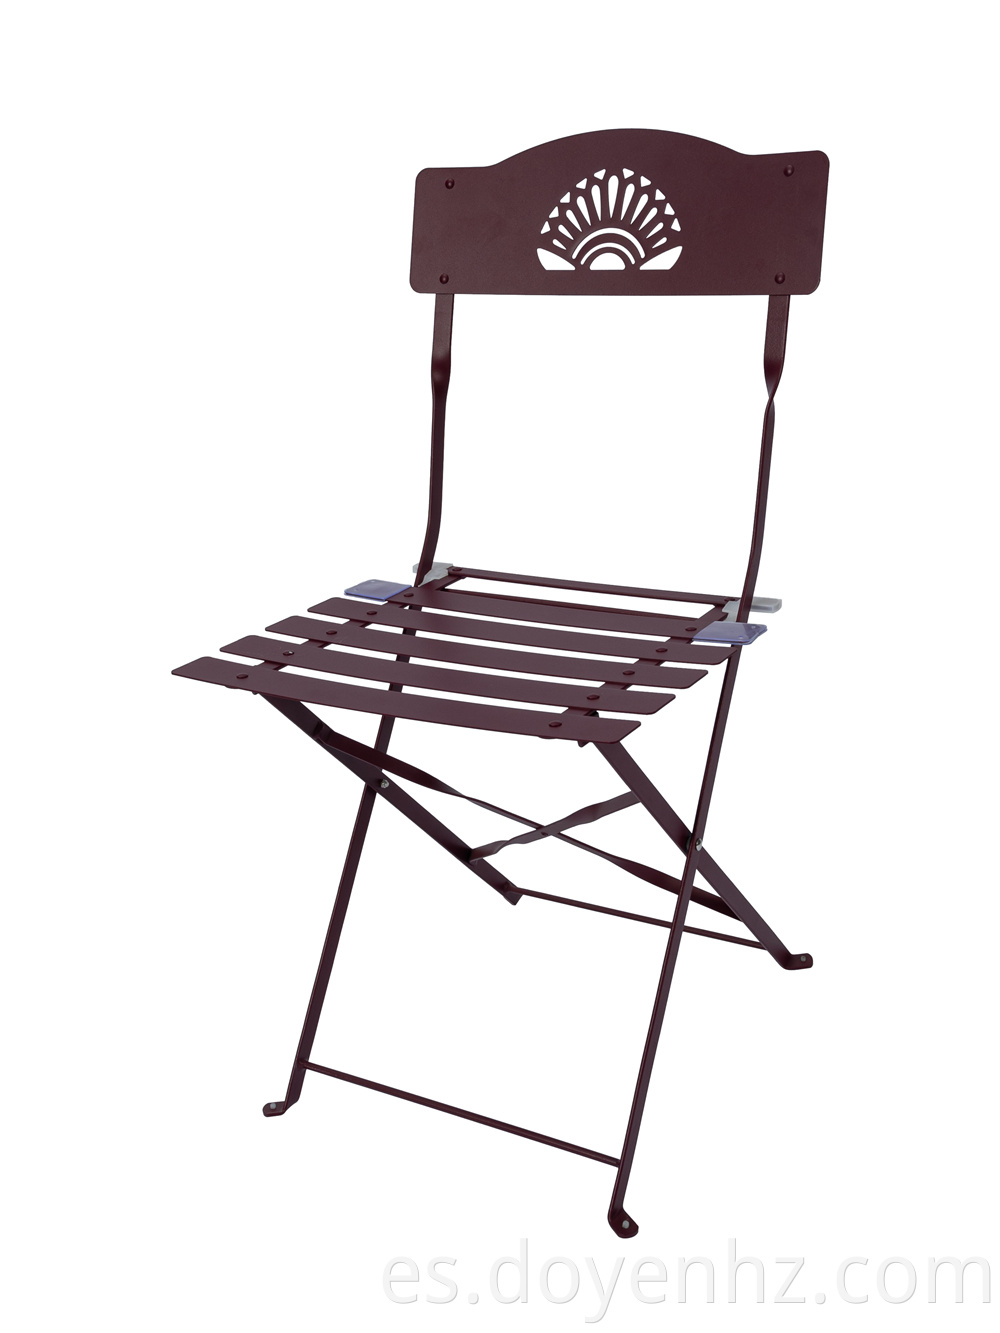 Outdoor Metal Folding Chair with Fanned Pattern Back